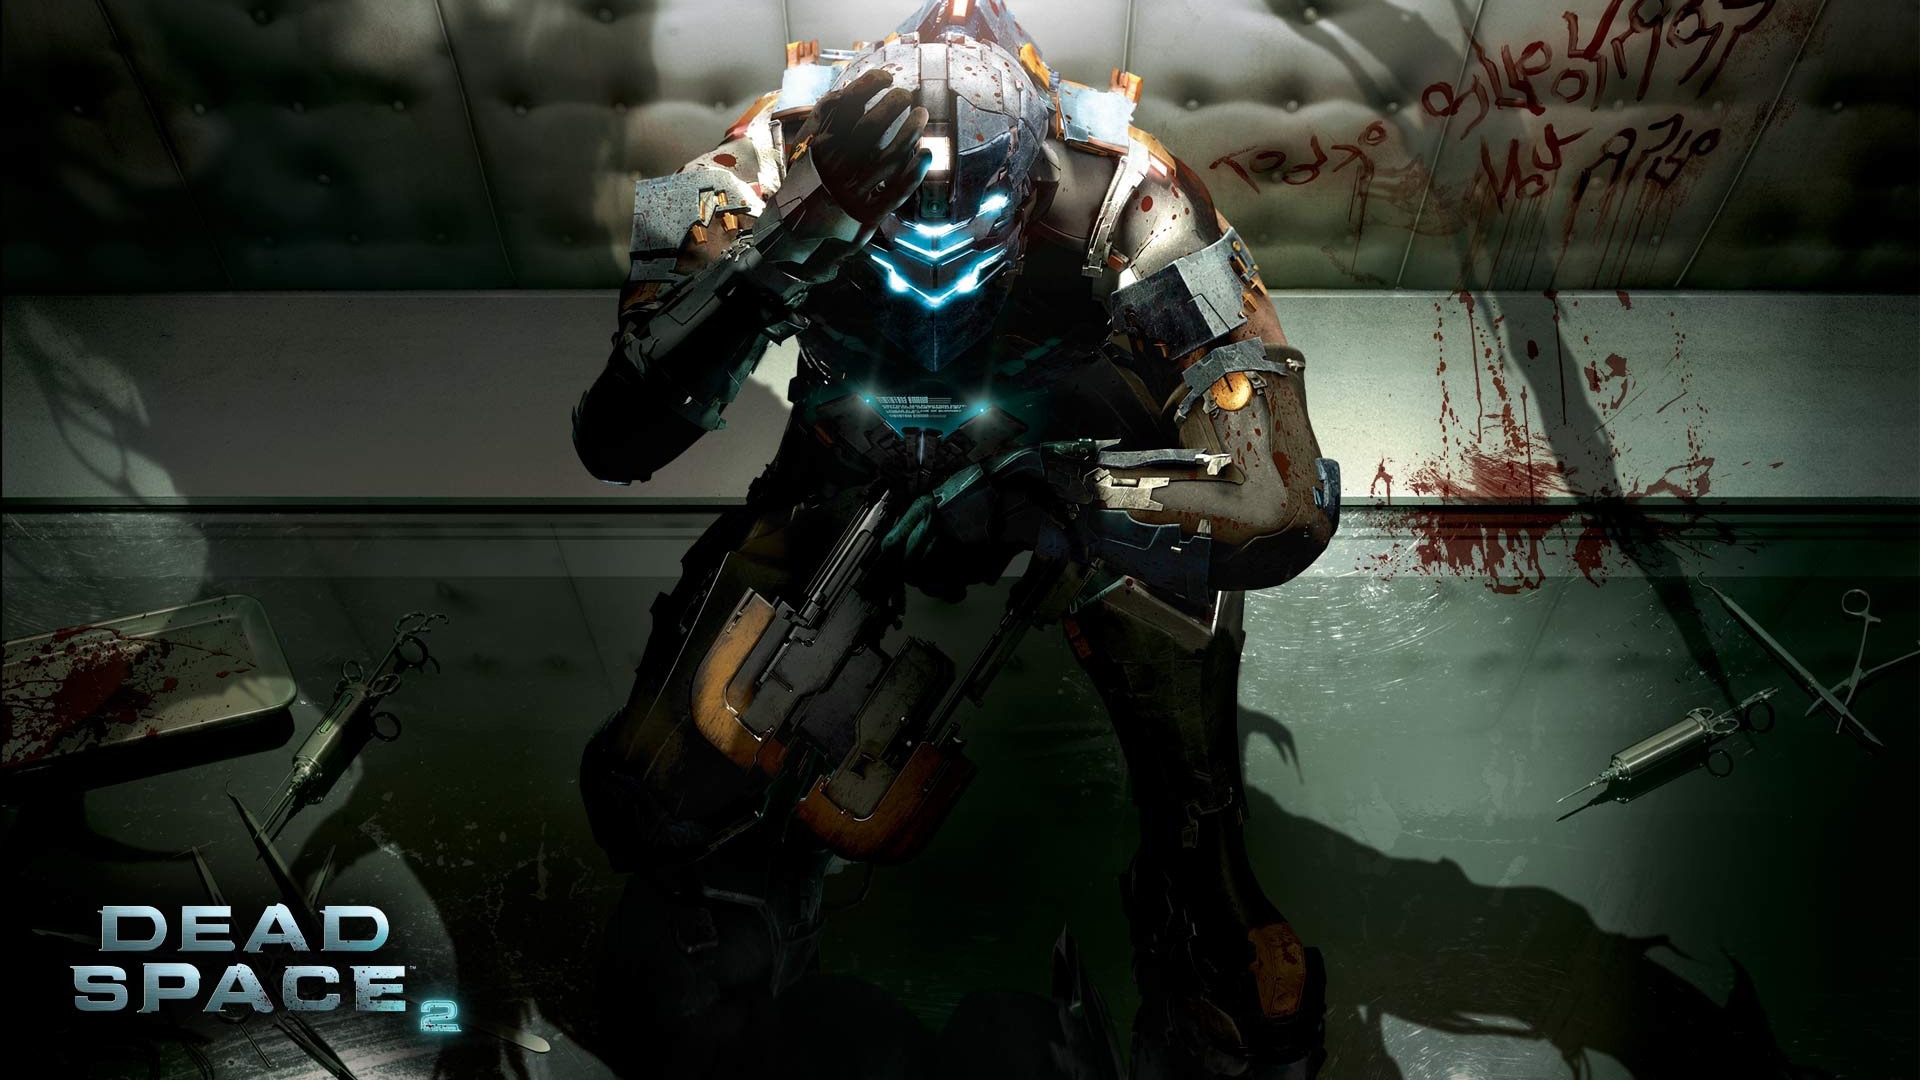 Dead Space 2 Character for 1920 x 1080 HDTV 1080p resolution